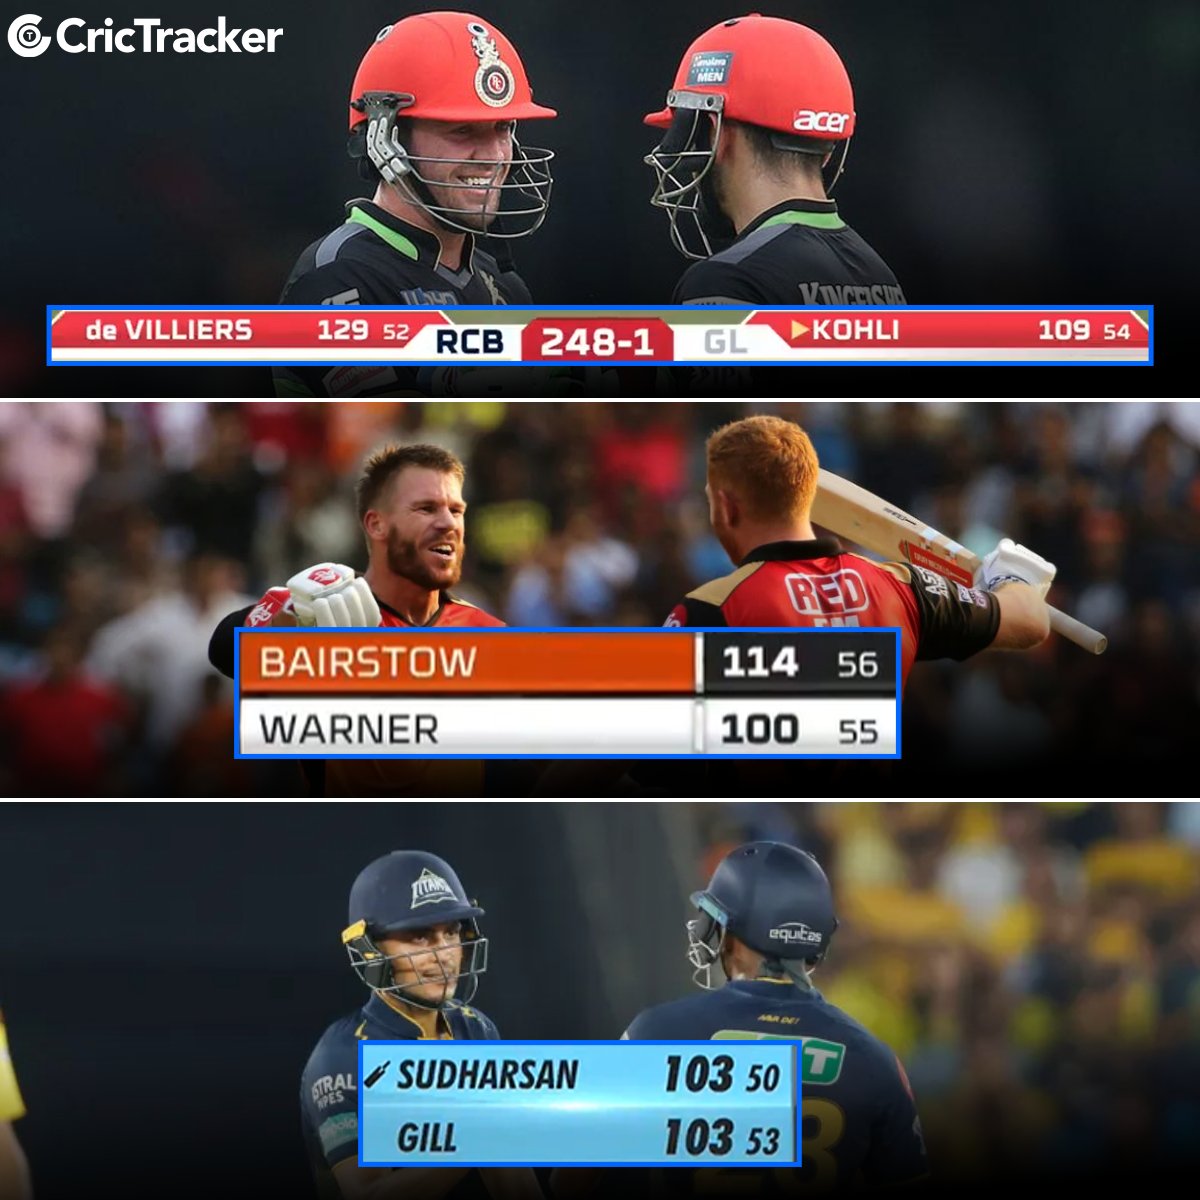 Only pairs to score centuries in an IPL match 🌟